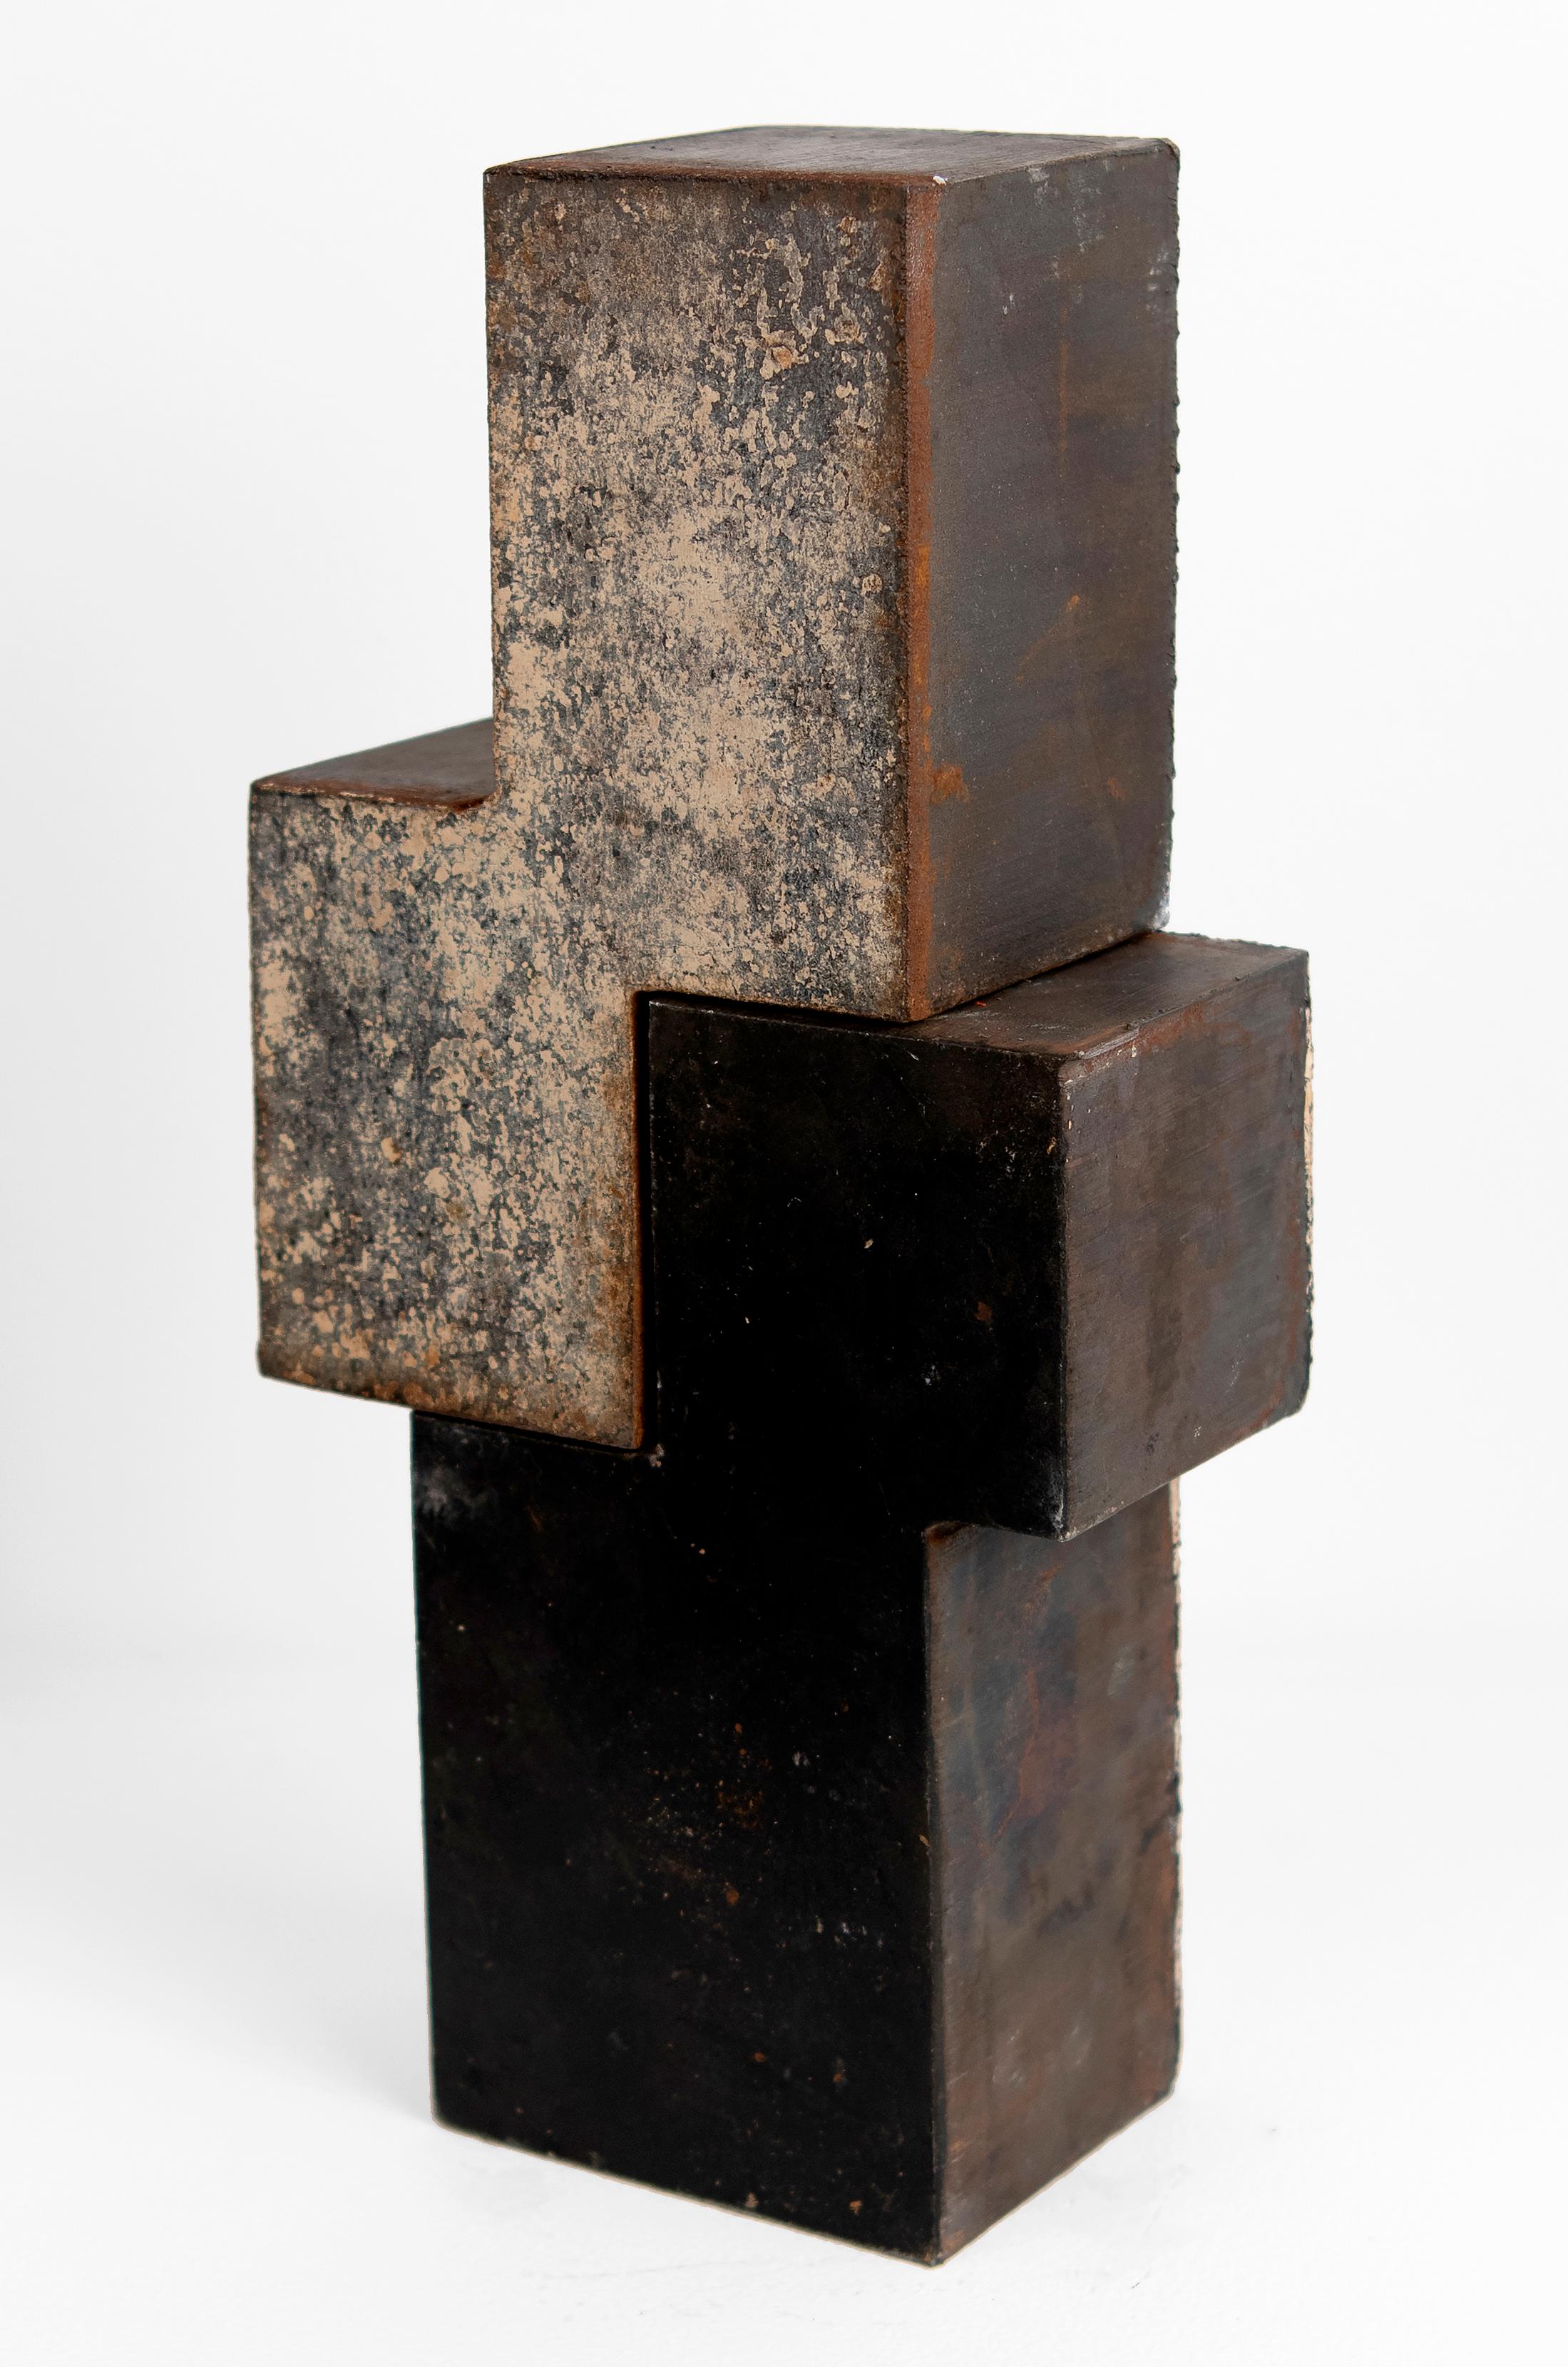 untitled sculpture (1) - Black Figurative Sculpture by Jonathan Waters